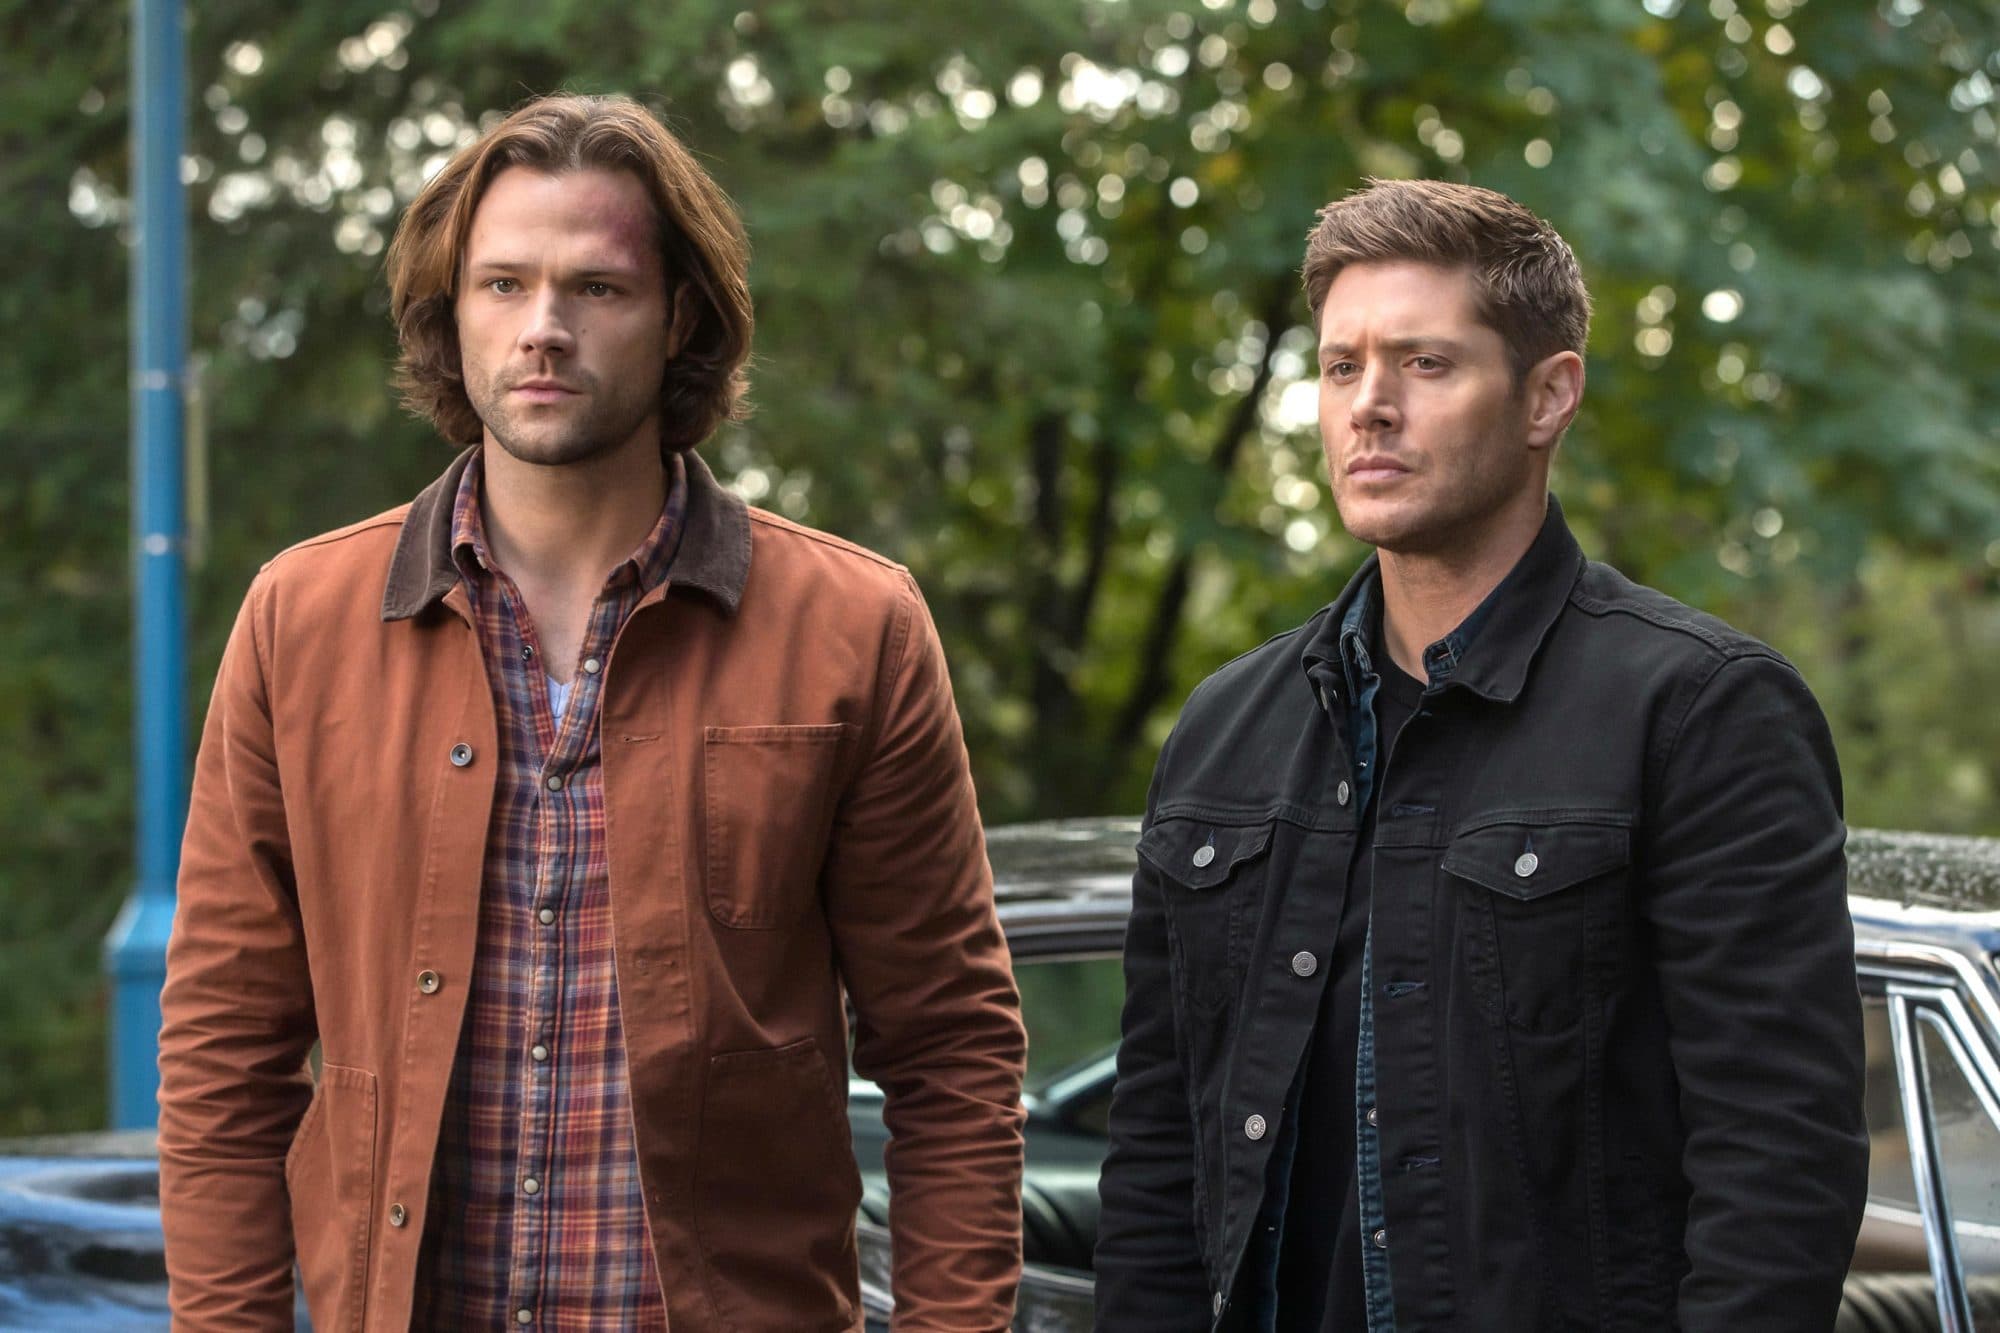 The Winchester Brothers in "Supernatural"